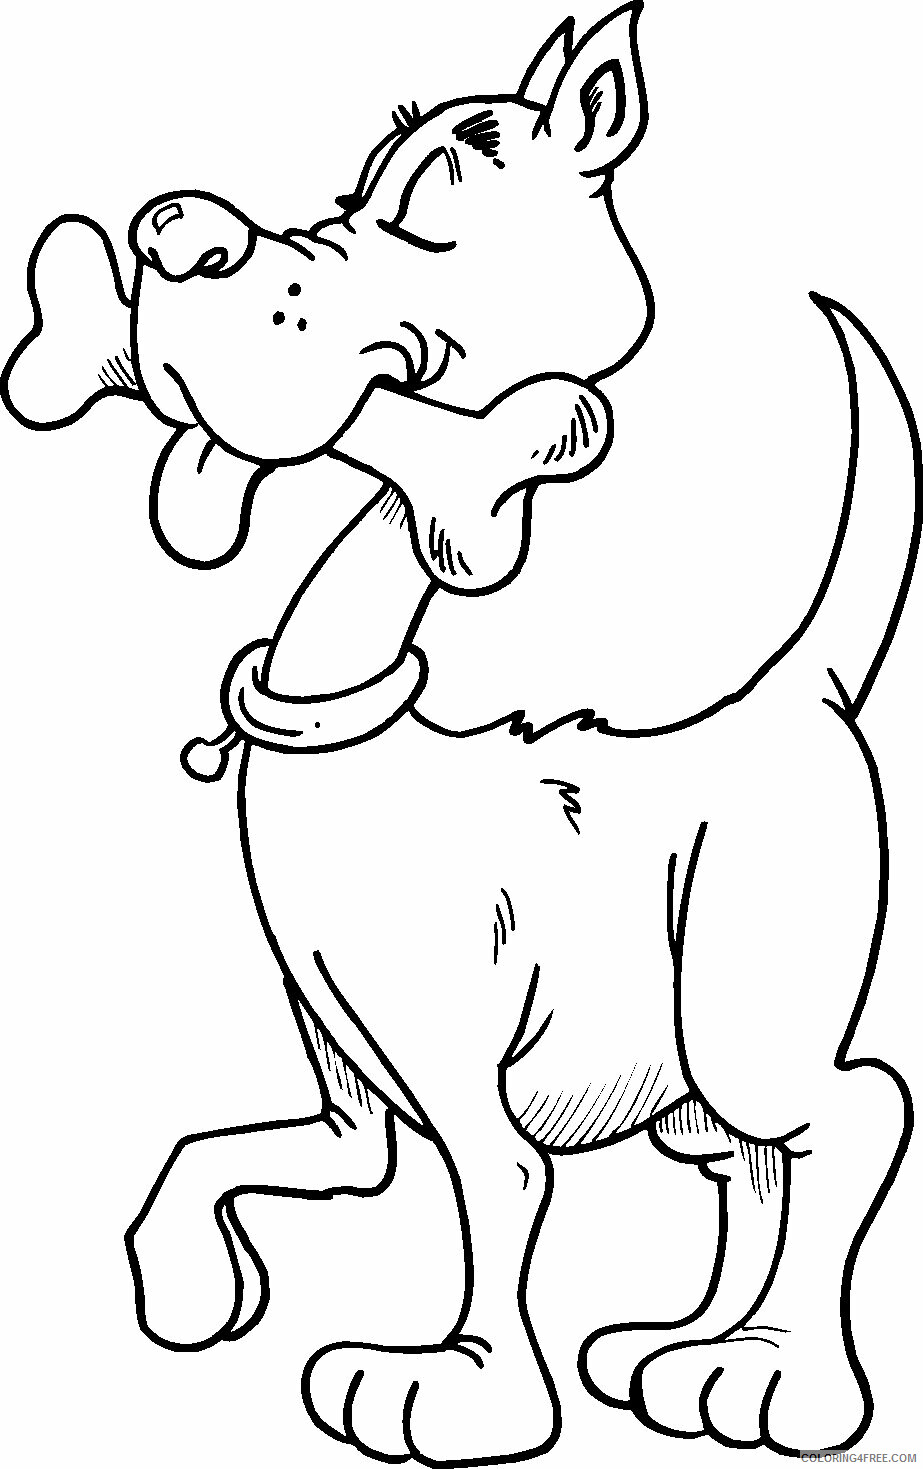 Animal Coloring Pages Animated Printable Sheets Cartoon Pictures Of Animals For 2021 a 0208 Coloring4free